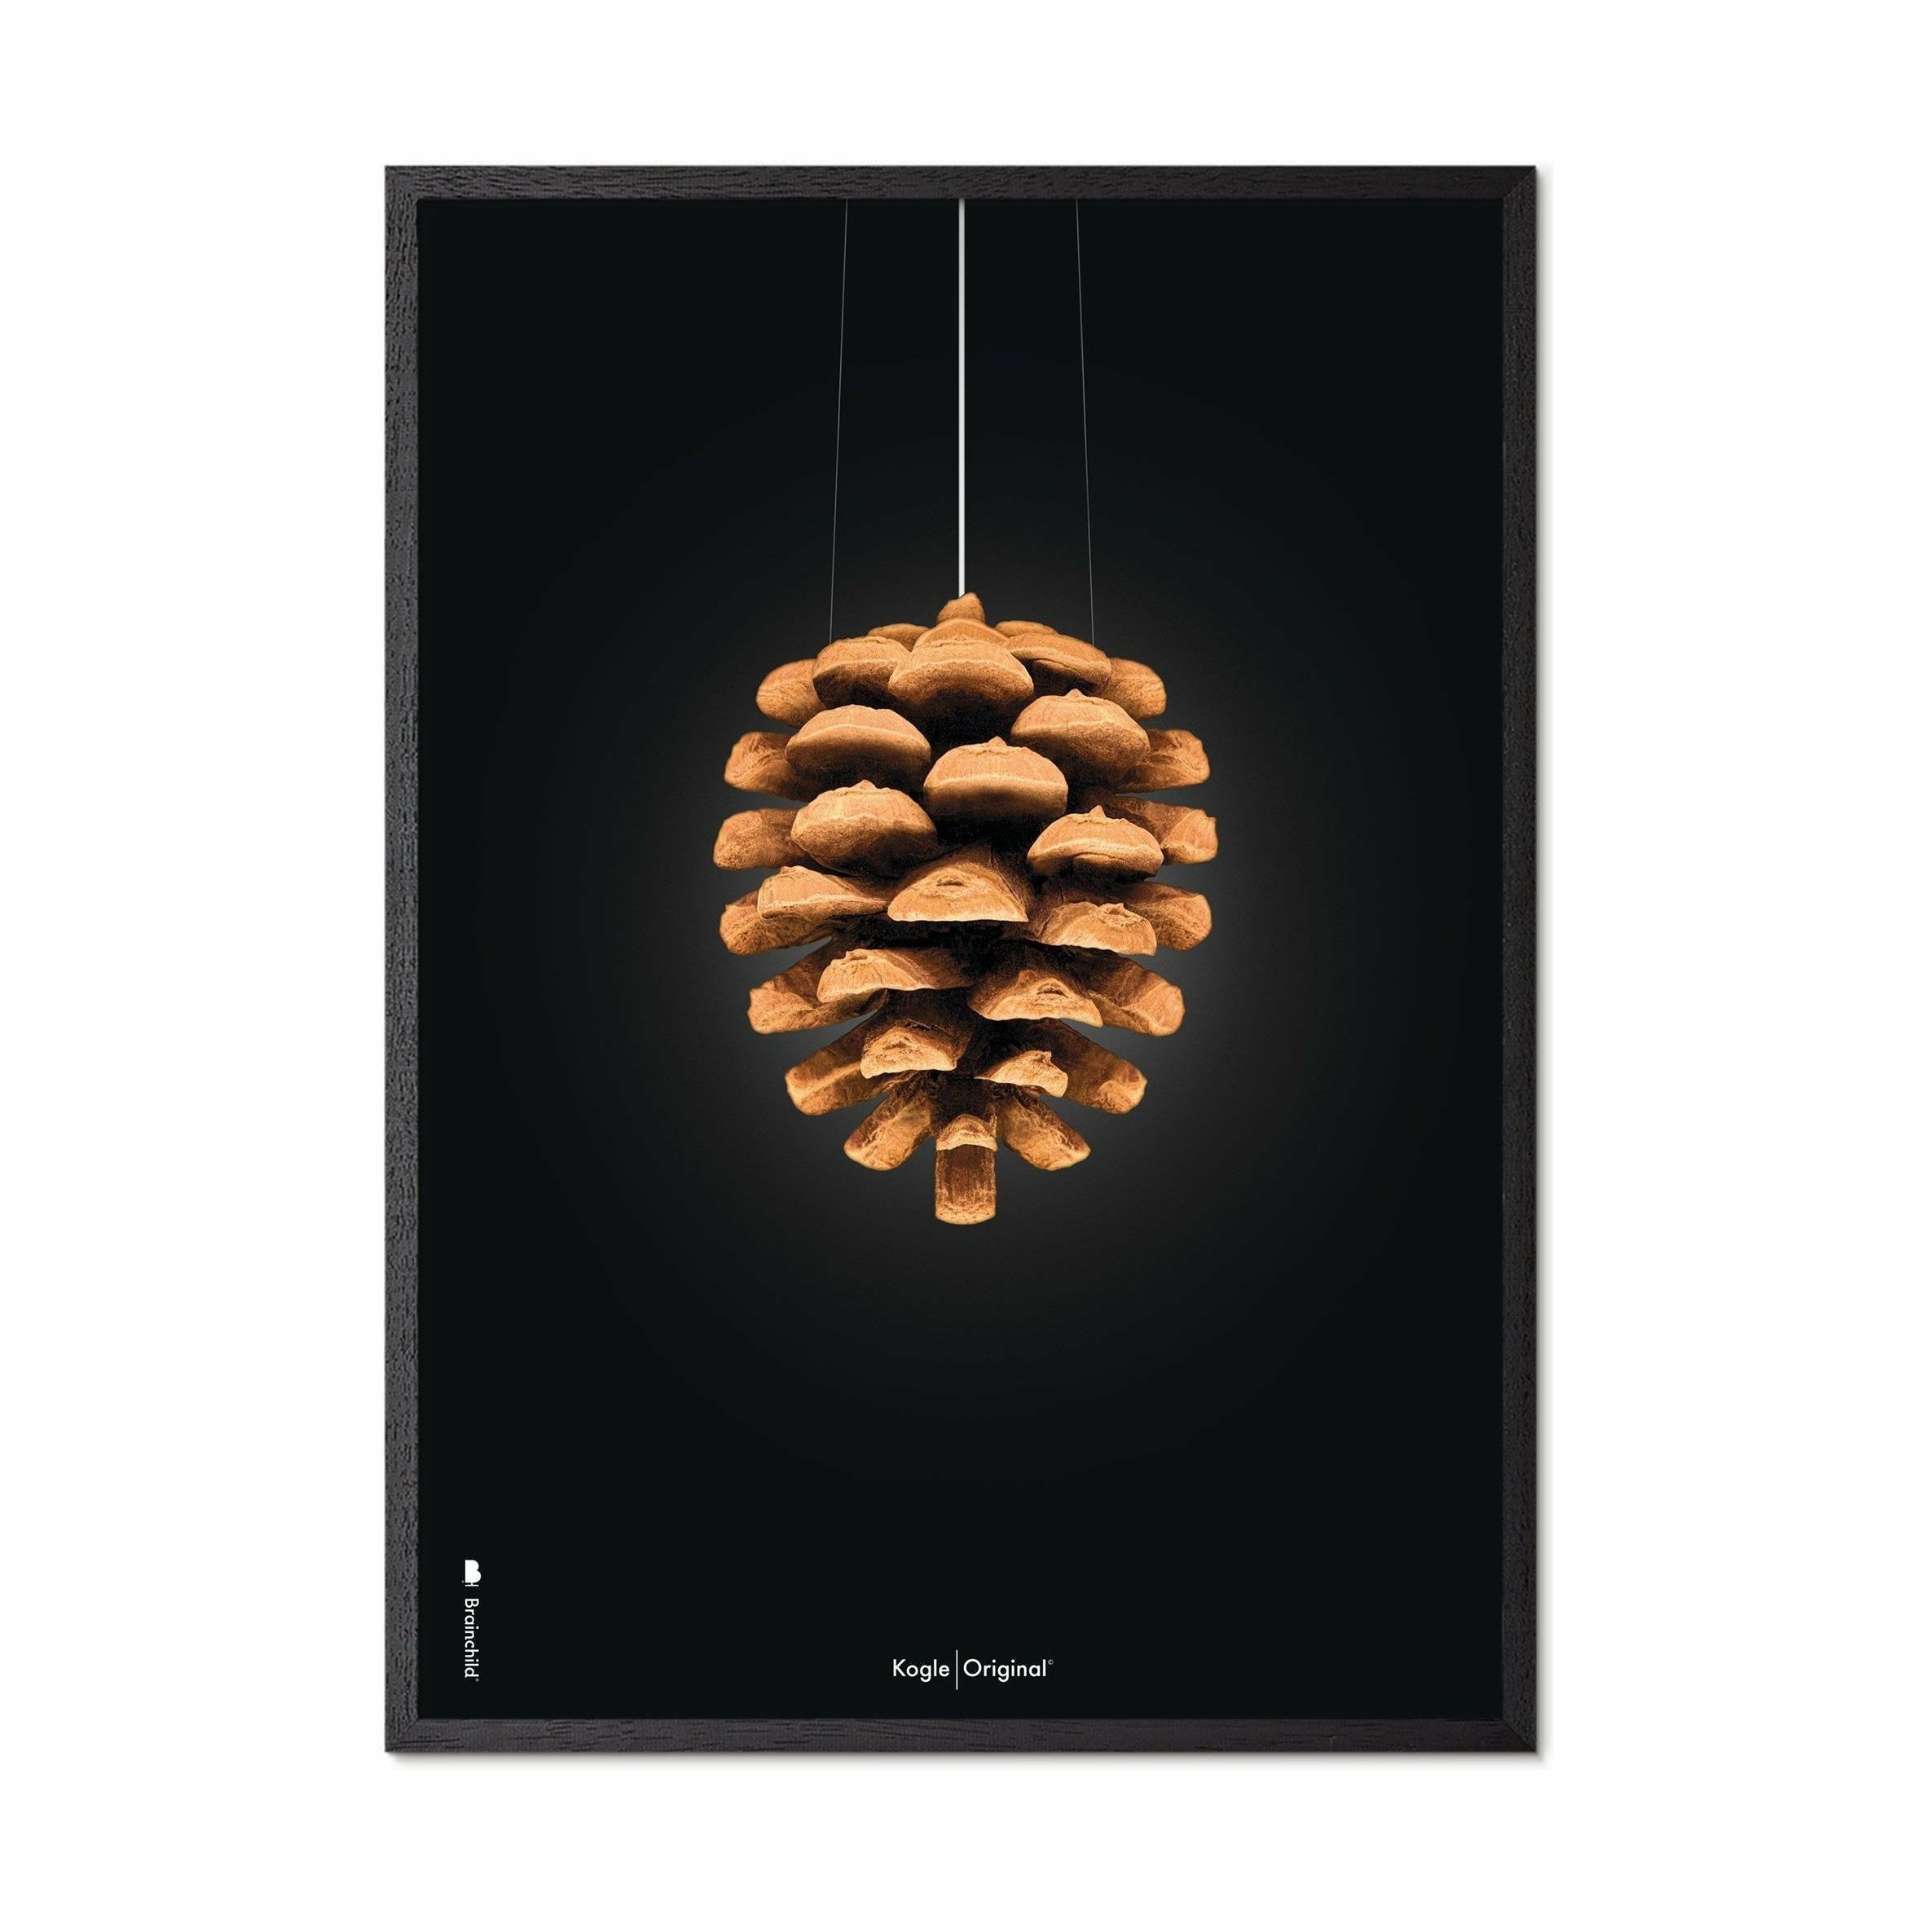 Brainchild Pine Cone Classic Poster, Frame In Black Lacquered Wood A5, Black Background